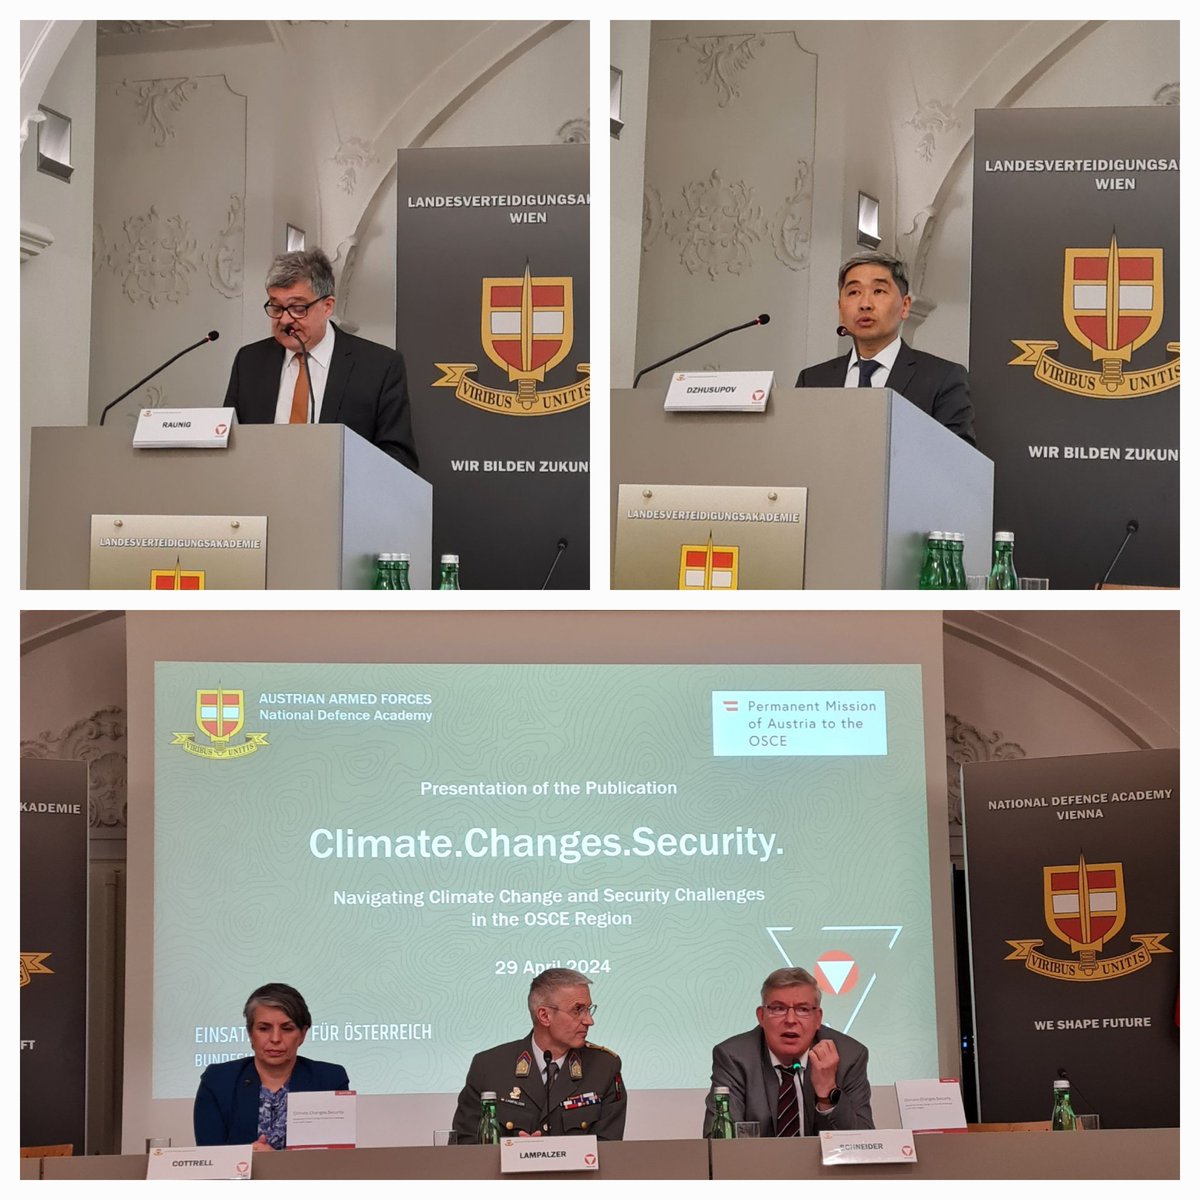 Yesterday, the important publication 'Climate.Changes.Security' by the National Defence Academy & the Permanent Mission of Austria to the OSCE was presented by initiators Colonel @HansLamp & Amb. Florian Raunig 👏 Keynotes by @BDzhusupov, Linsey Cottrell, Felix Schneider.